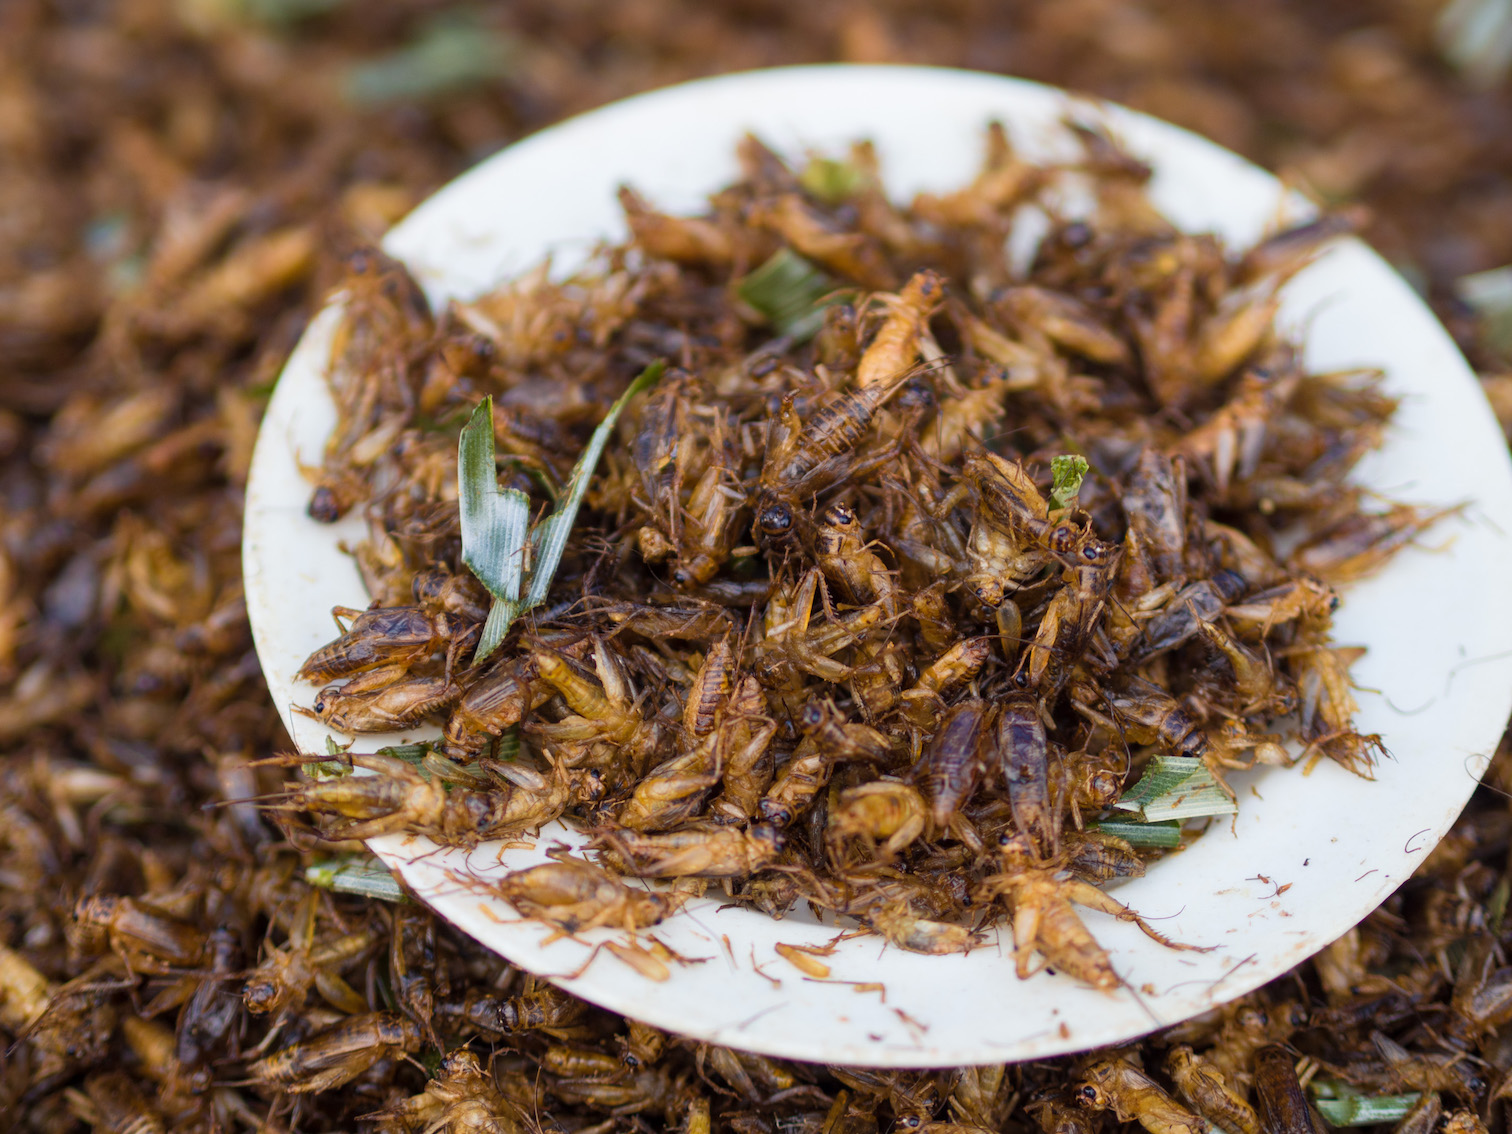 Image: Academics are trying to “normalize” eating insects by baking biscuits out of ground insect powder